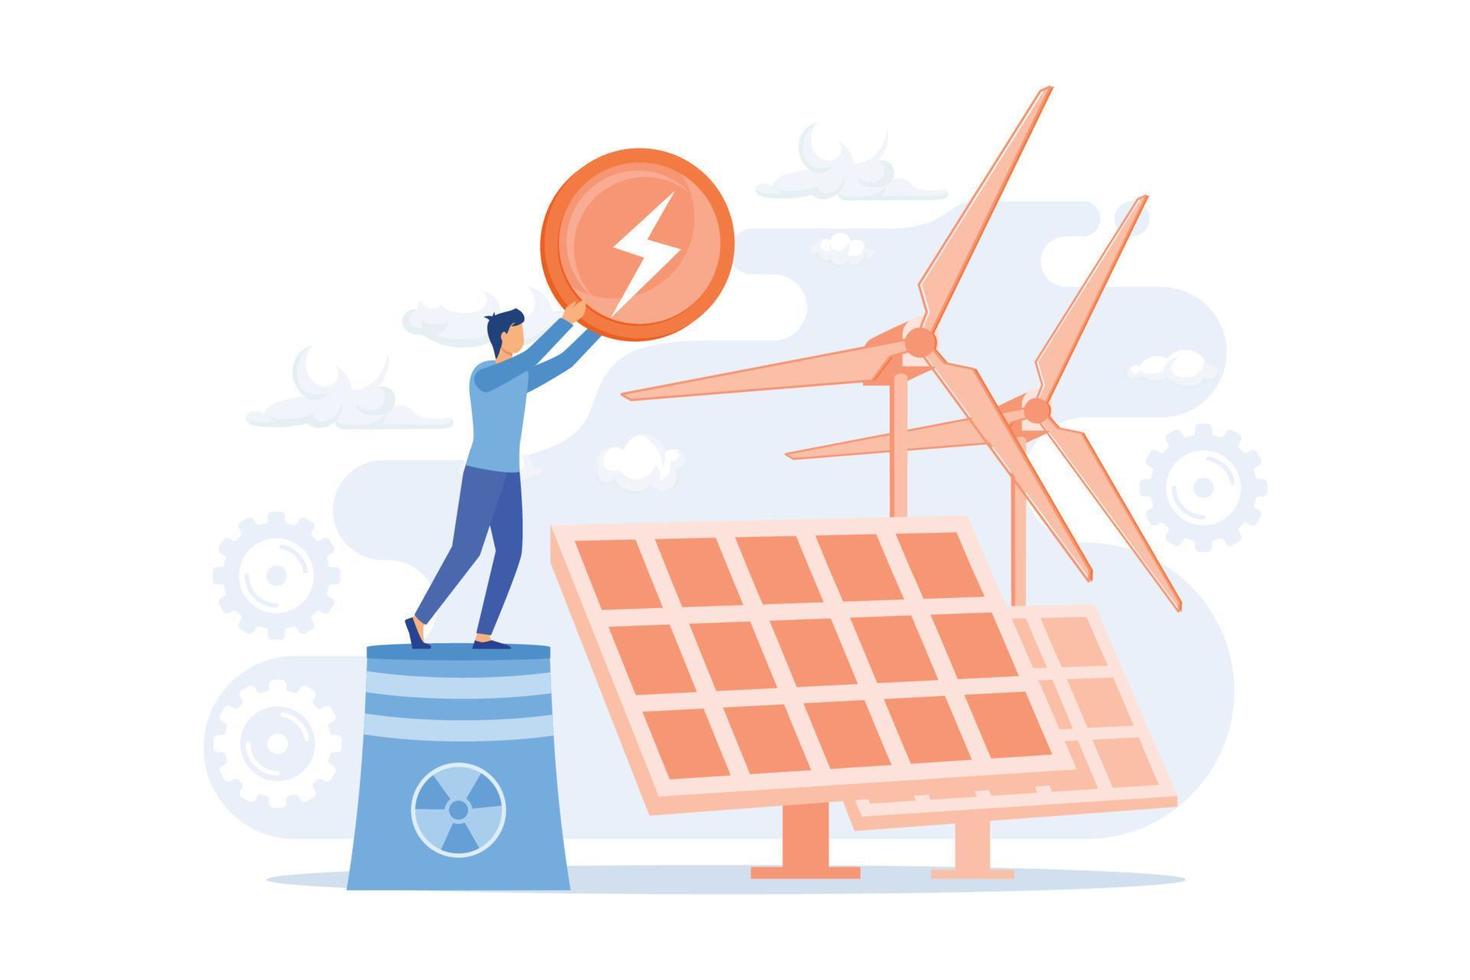 Atomic reactor, windmill and solar battery, energy production. Nuclear power plant, atom fission process vector illustration